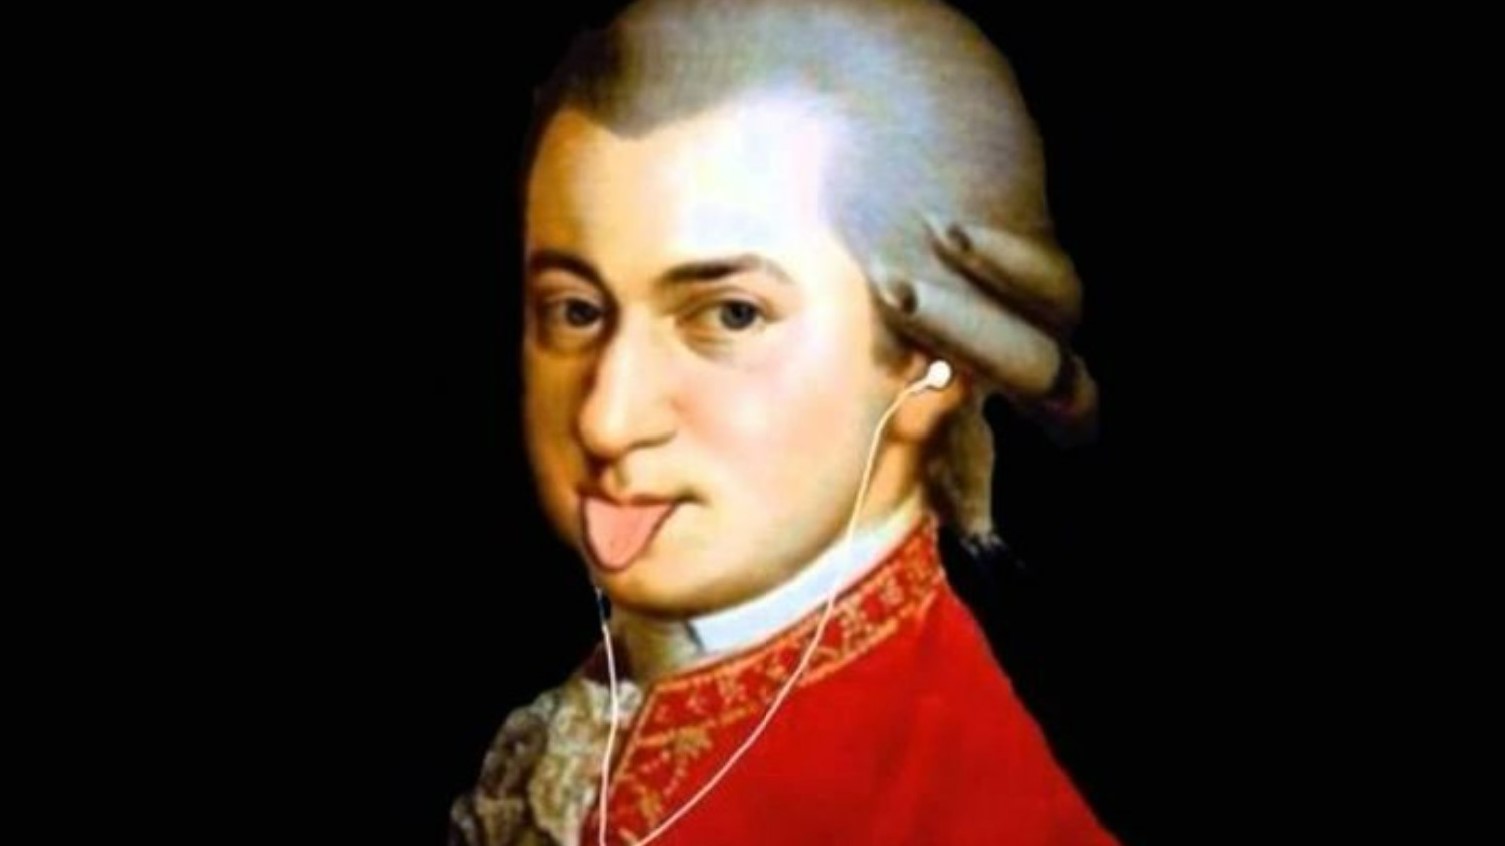 Redesigned image of Mozart with his tongue out